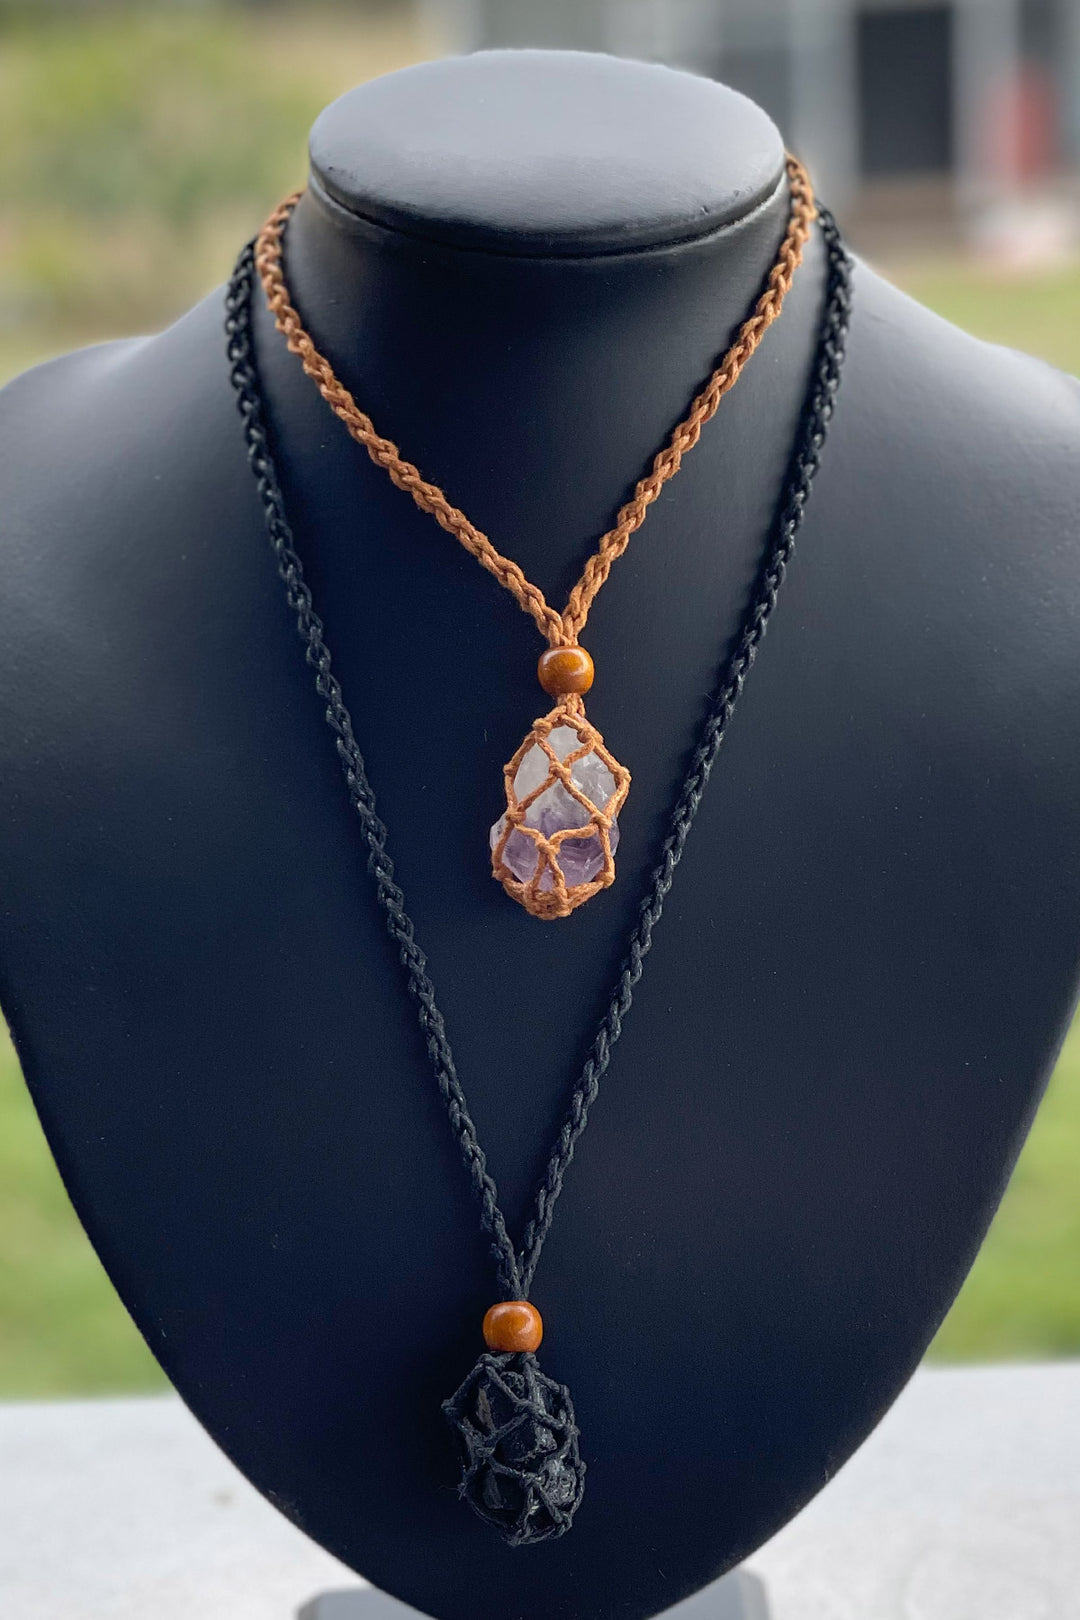 A short brown macrame necklace holding a piece of amethyst, worn with a long black version holding a black crystal. 